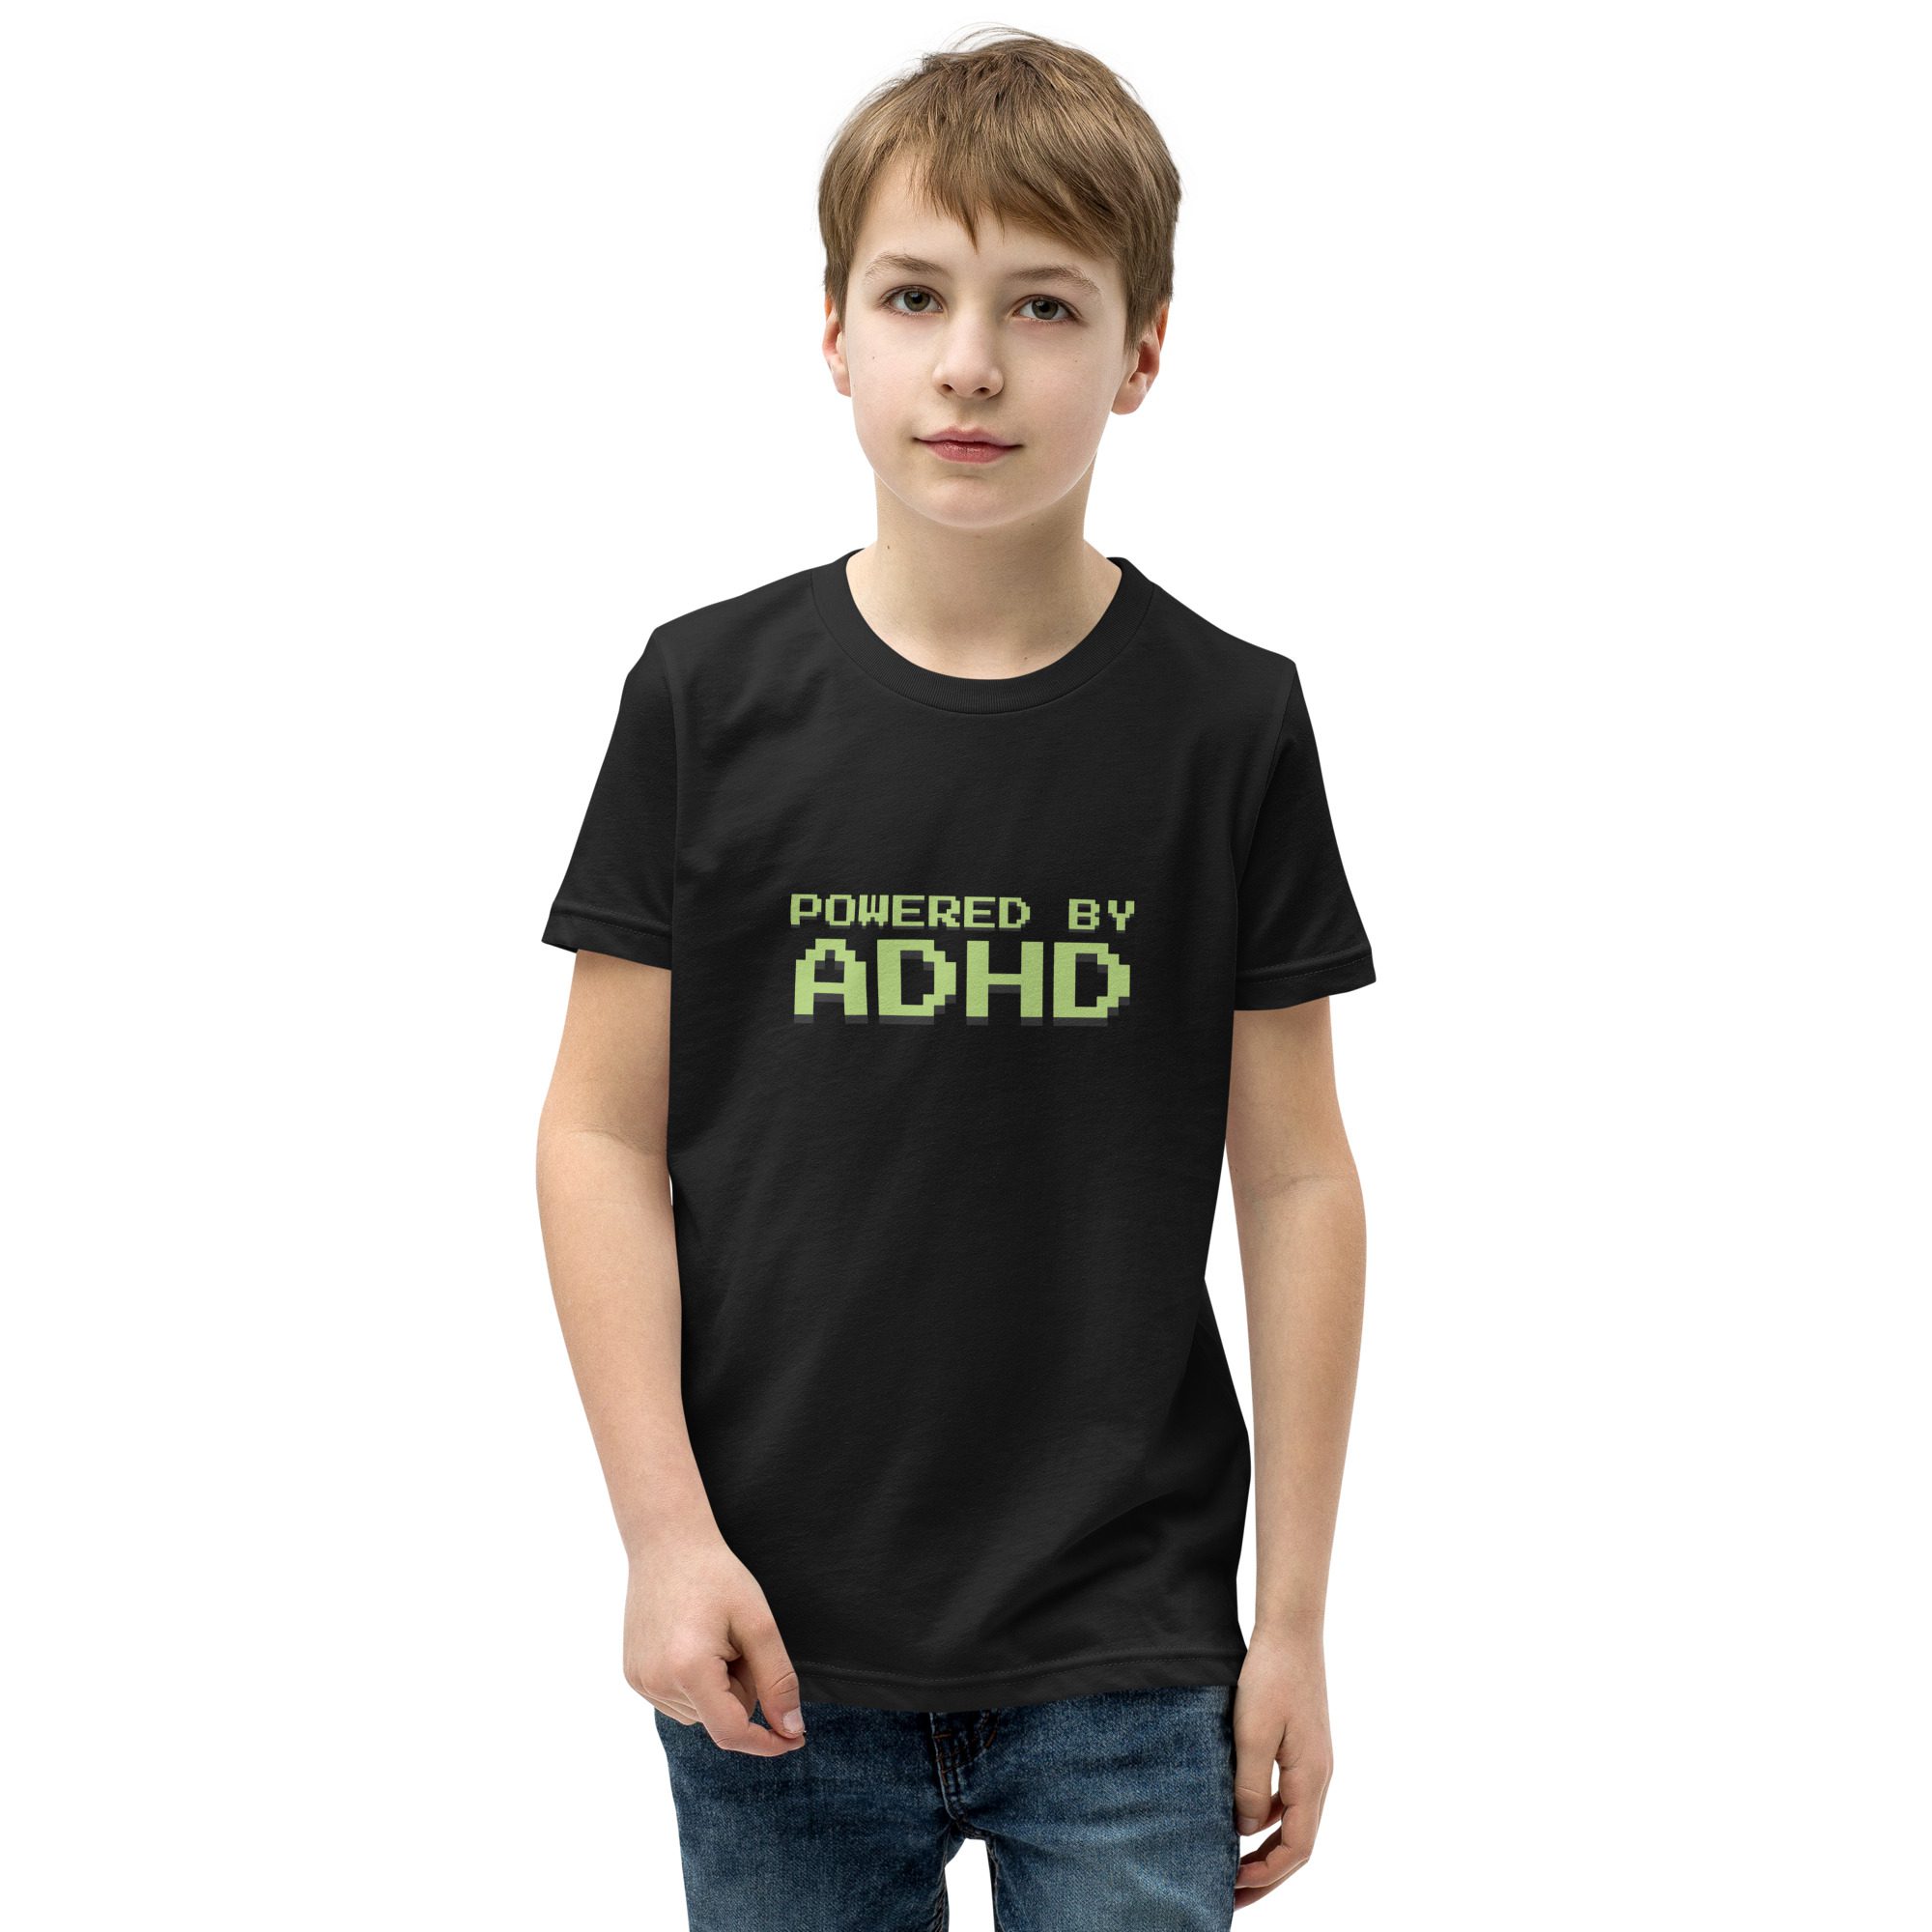 Powered By ADHD Youth T-Shirt